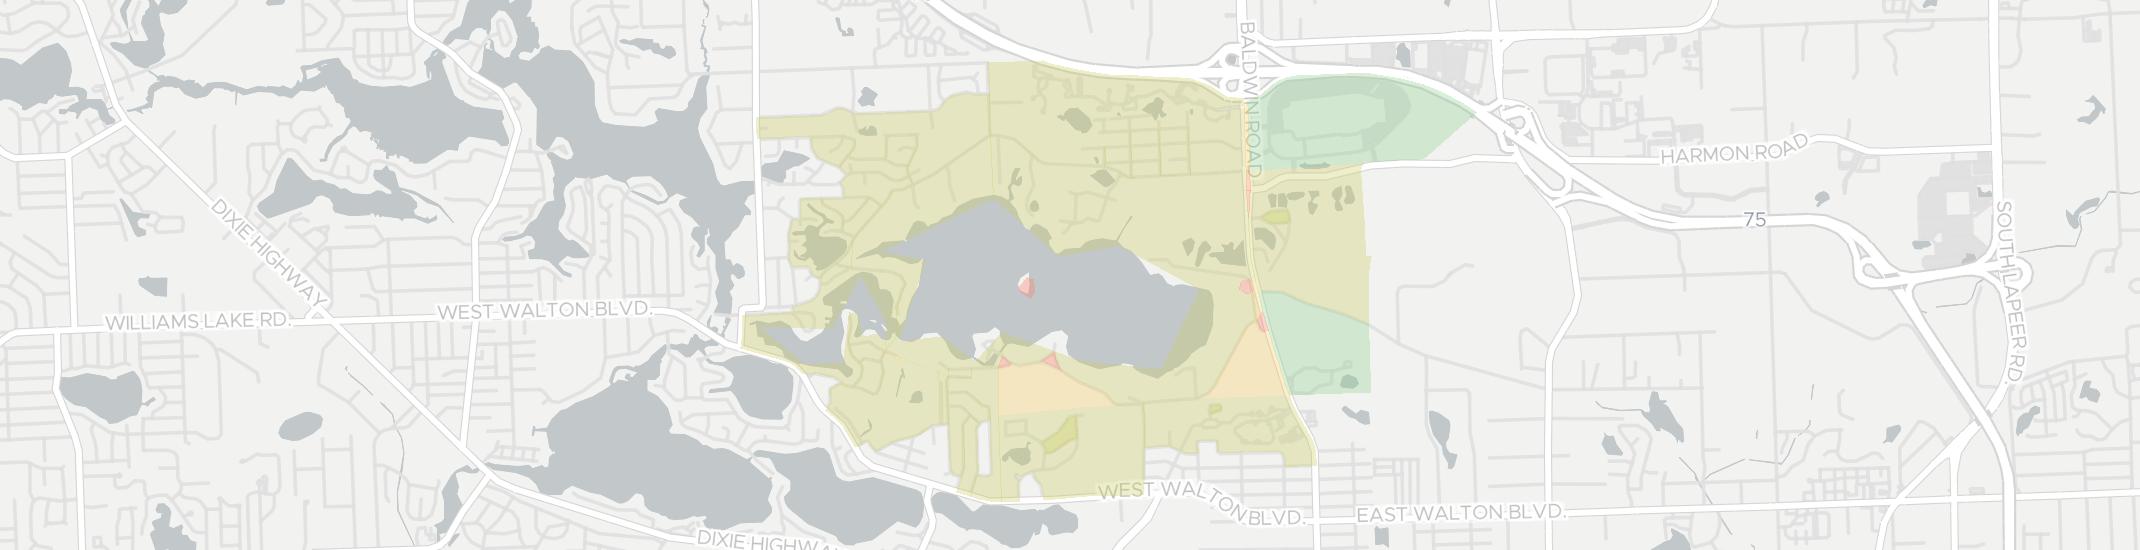 Lake Angelus Internet Competition Map. Click for interactive map.